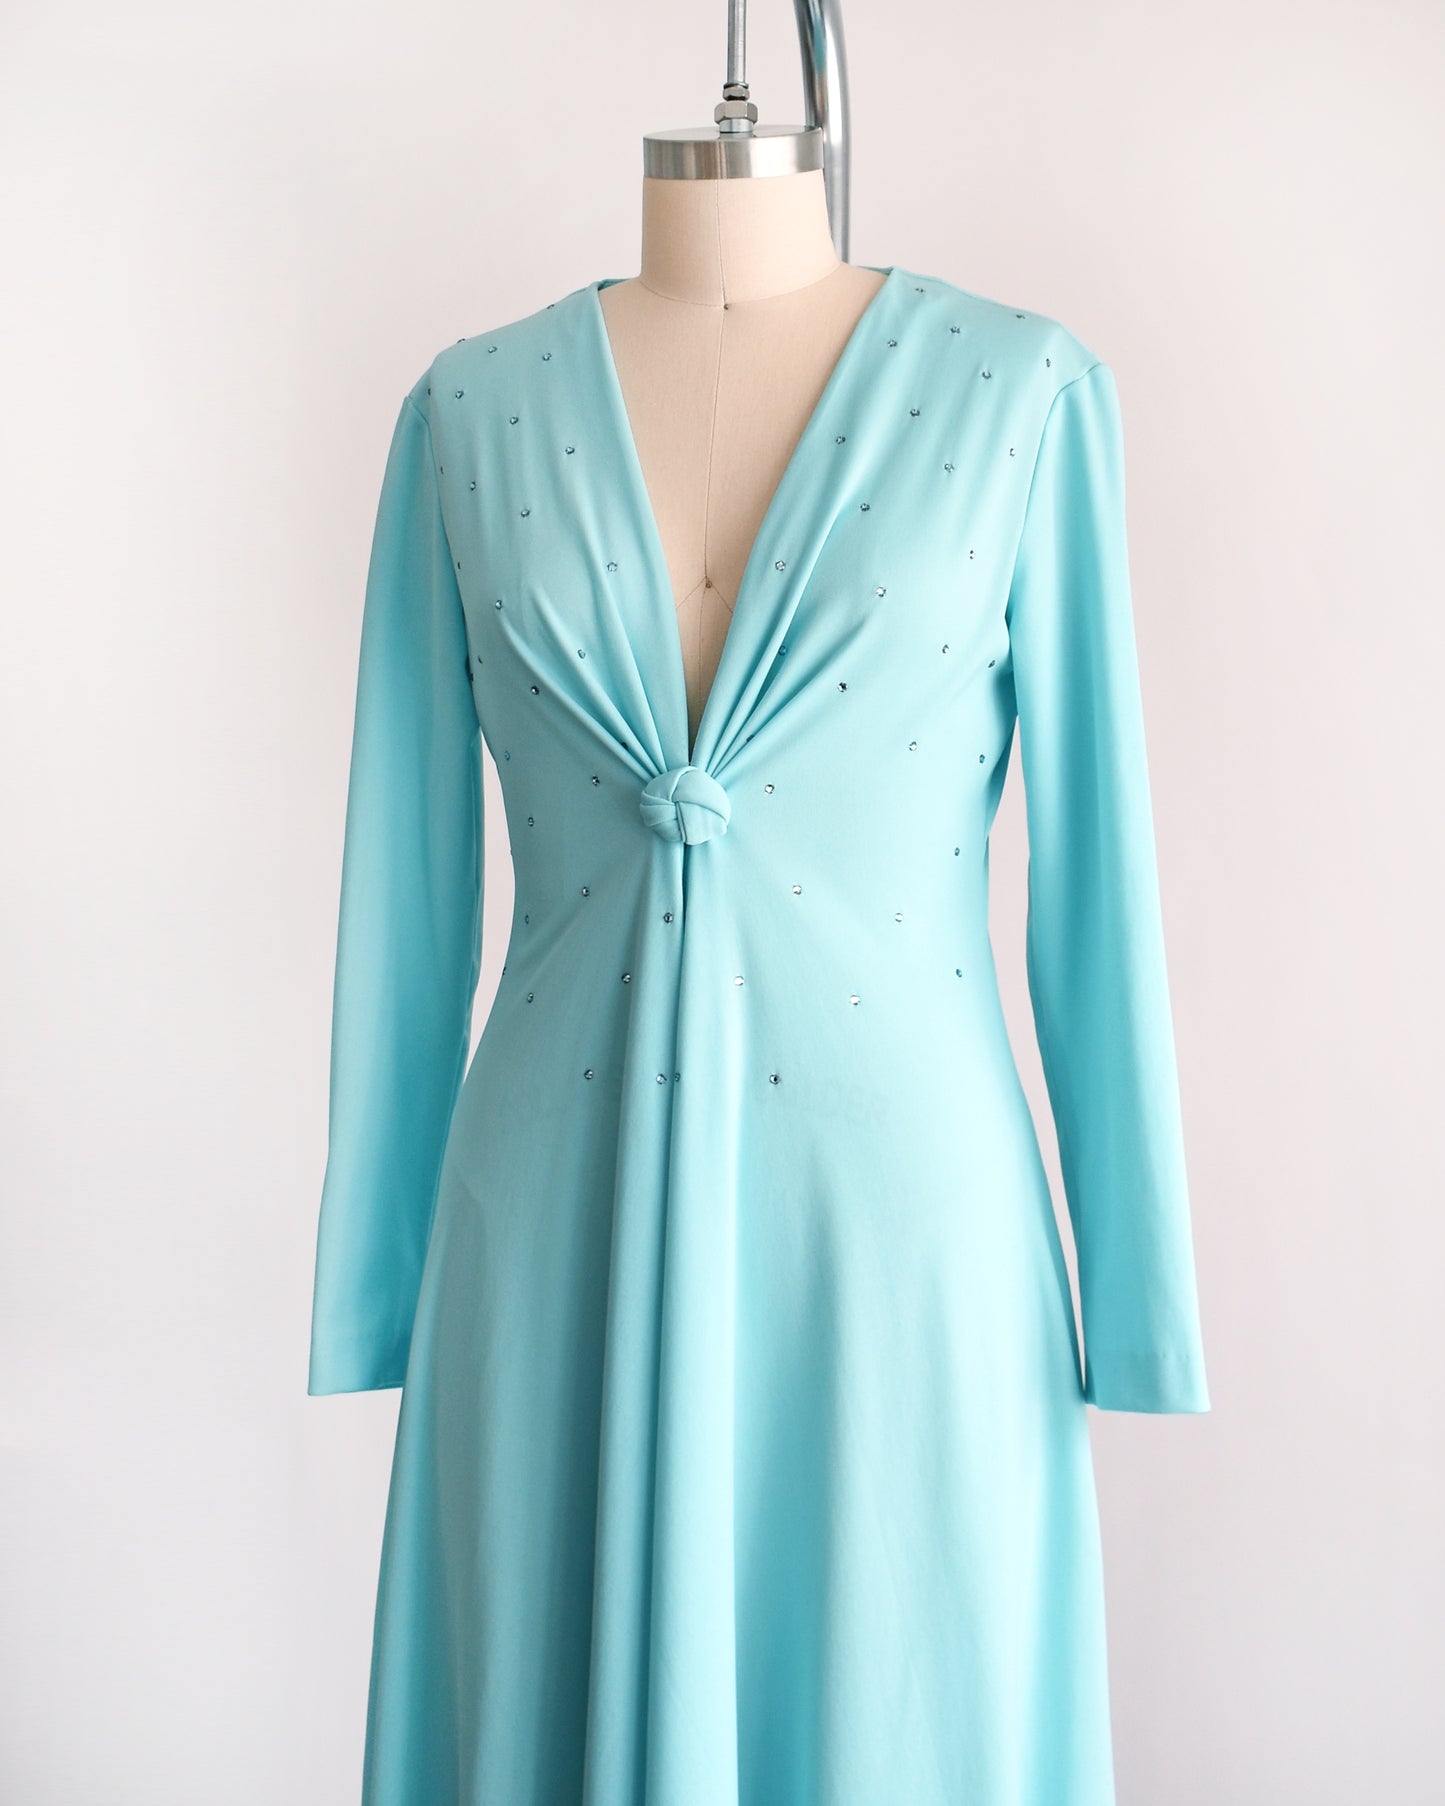 side front view of a vintage 1970s light blue maxi dress that has rhinestones on the bodice, a plunging v-neckline, and long sleeves